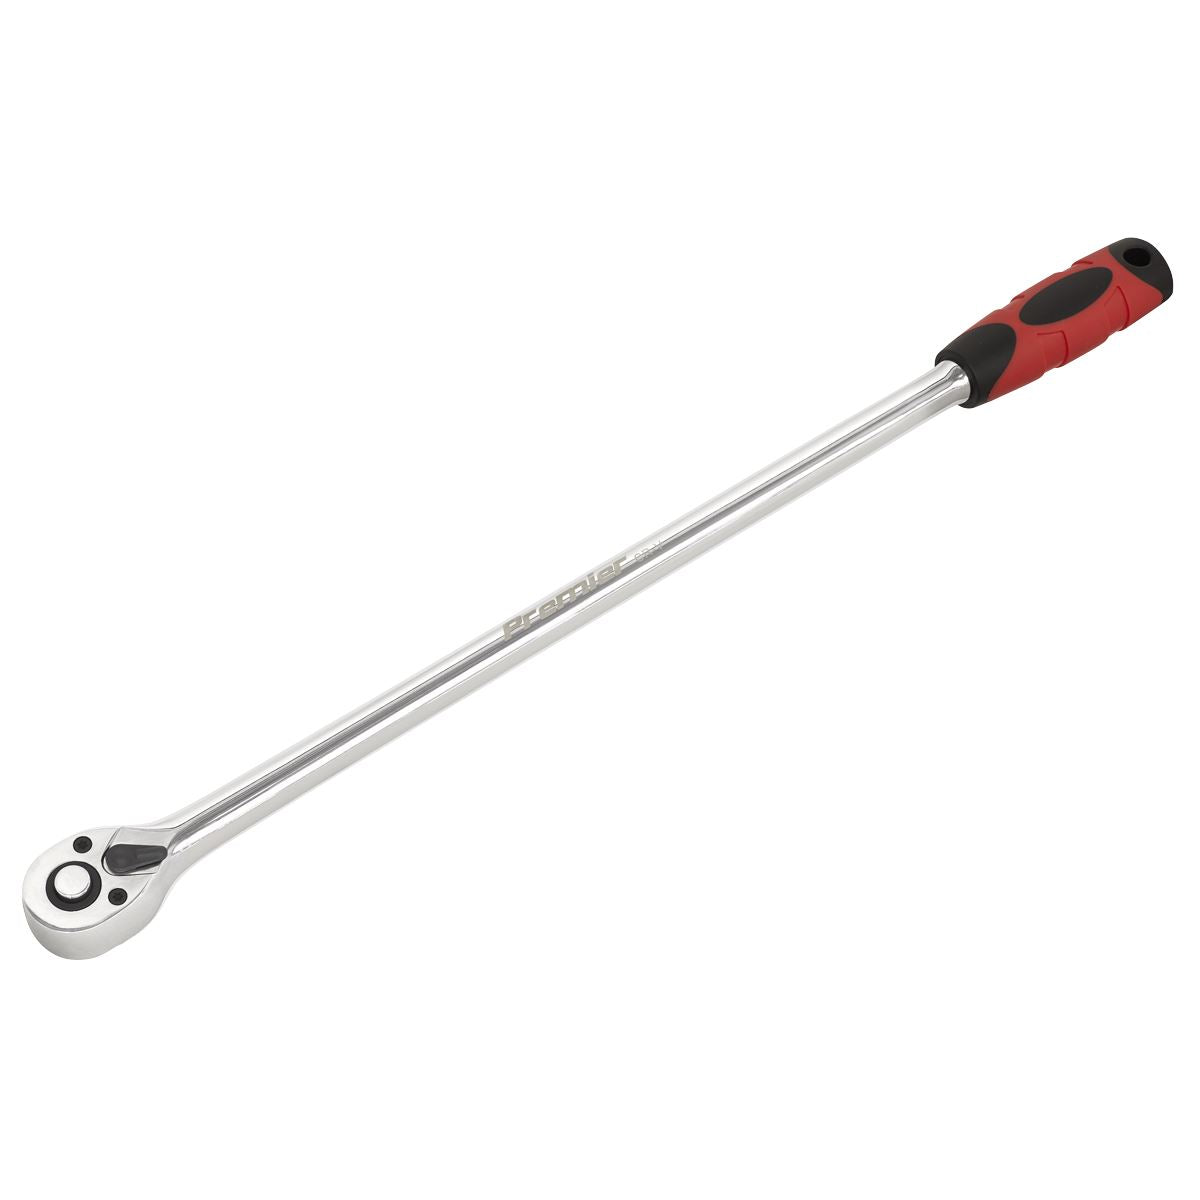 Sealey Ratchet Wrench Extra-Long 435mm 3/8"Sq Drive AK6694